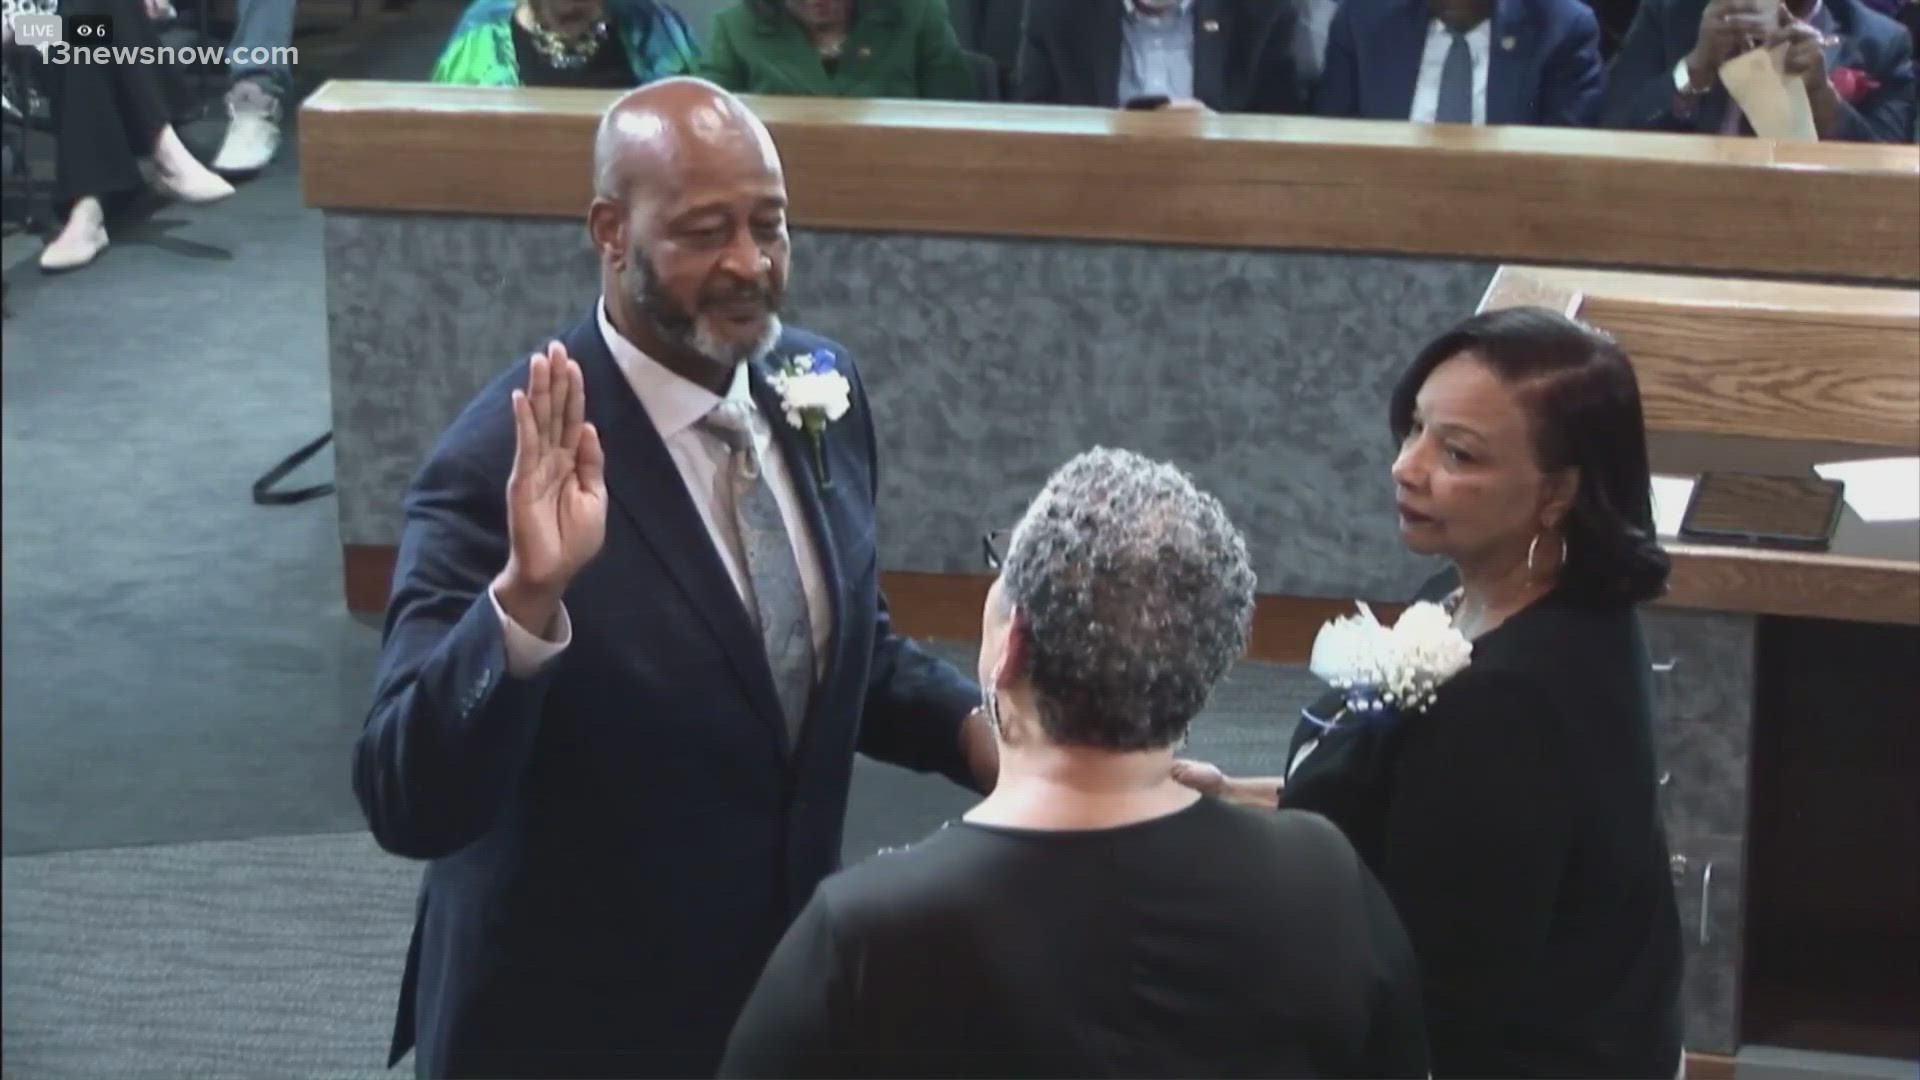 Steven Carter was sworn in today after a split city council appointed him to the job last month.